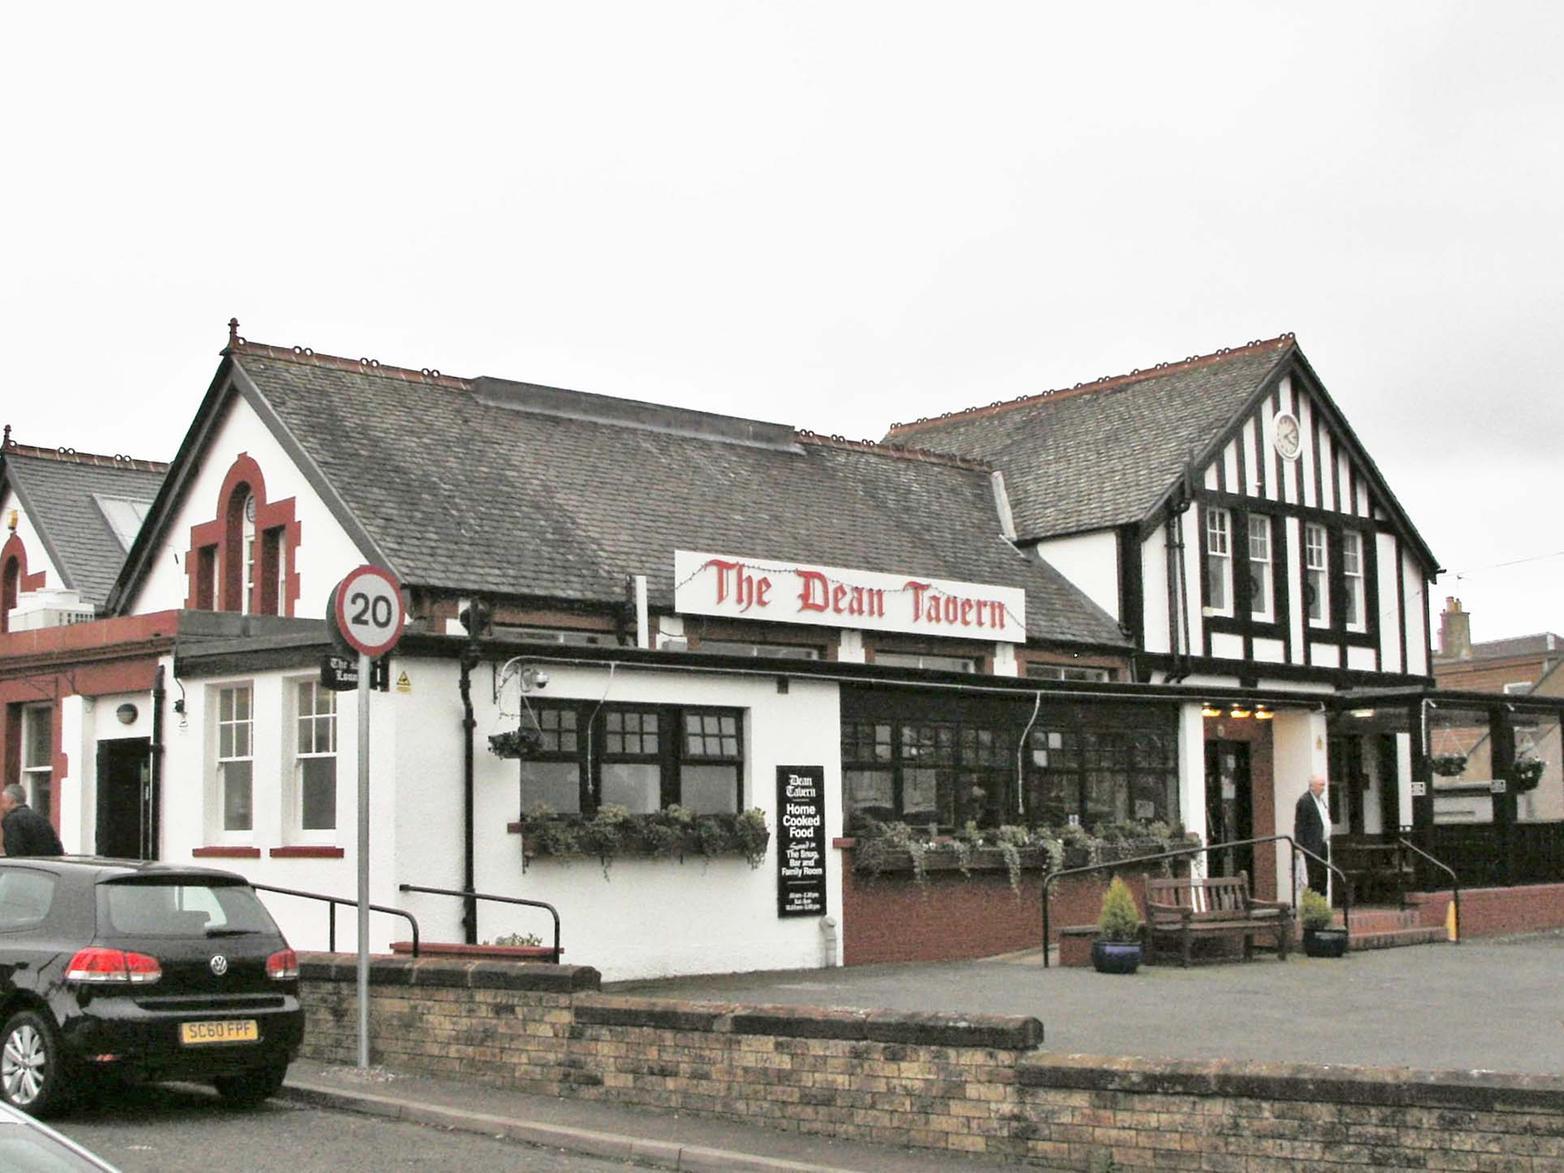 Dean Tavern dates back to 1910 and plays an important role in the Newtongrange community. The pub took second place in the prize for the Lothians.